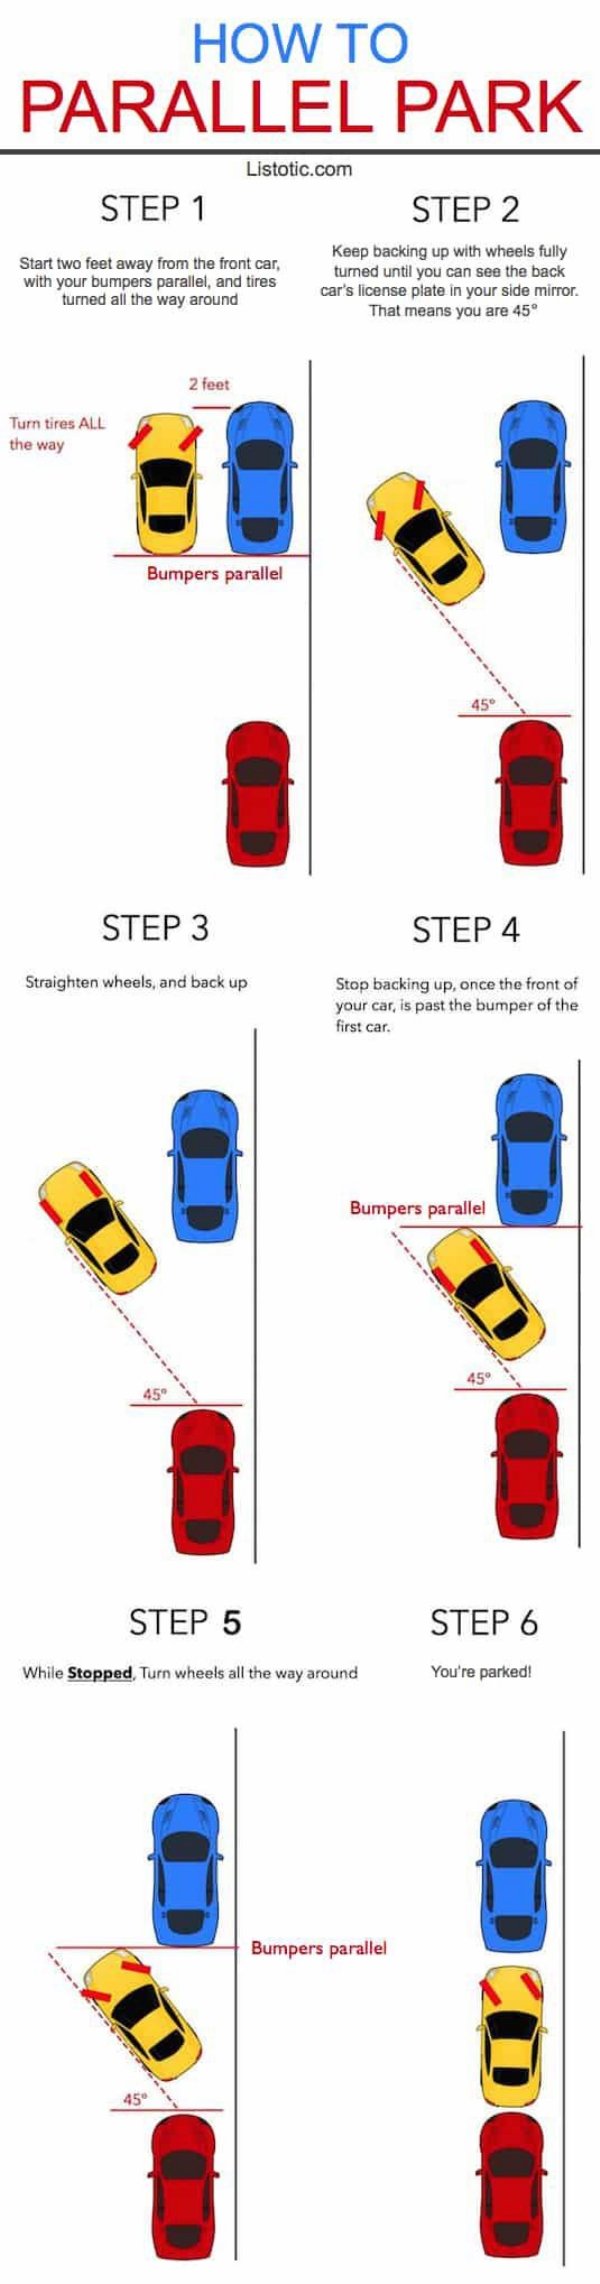 parallel parking guide - How To Parallel Park Listotic.com Step 1 Step 2 Start two feet away from the front car, with your bumpers parallel, and tires turned all the way around Keep backing up with wheels fully turned until you can see the back car's lice